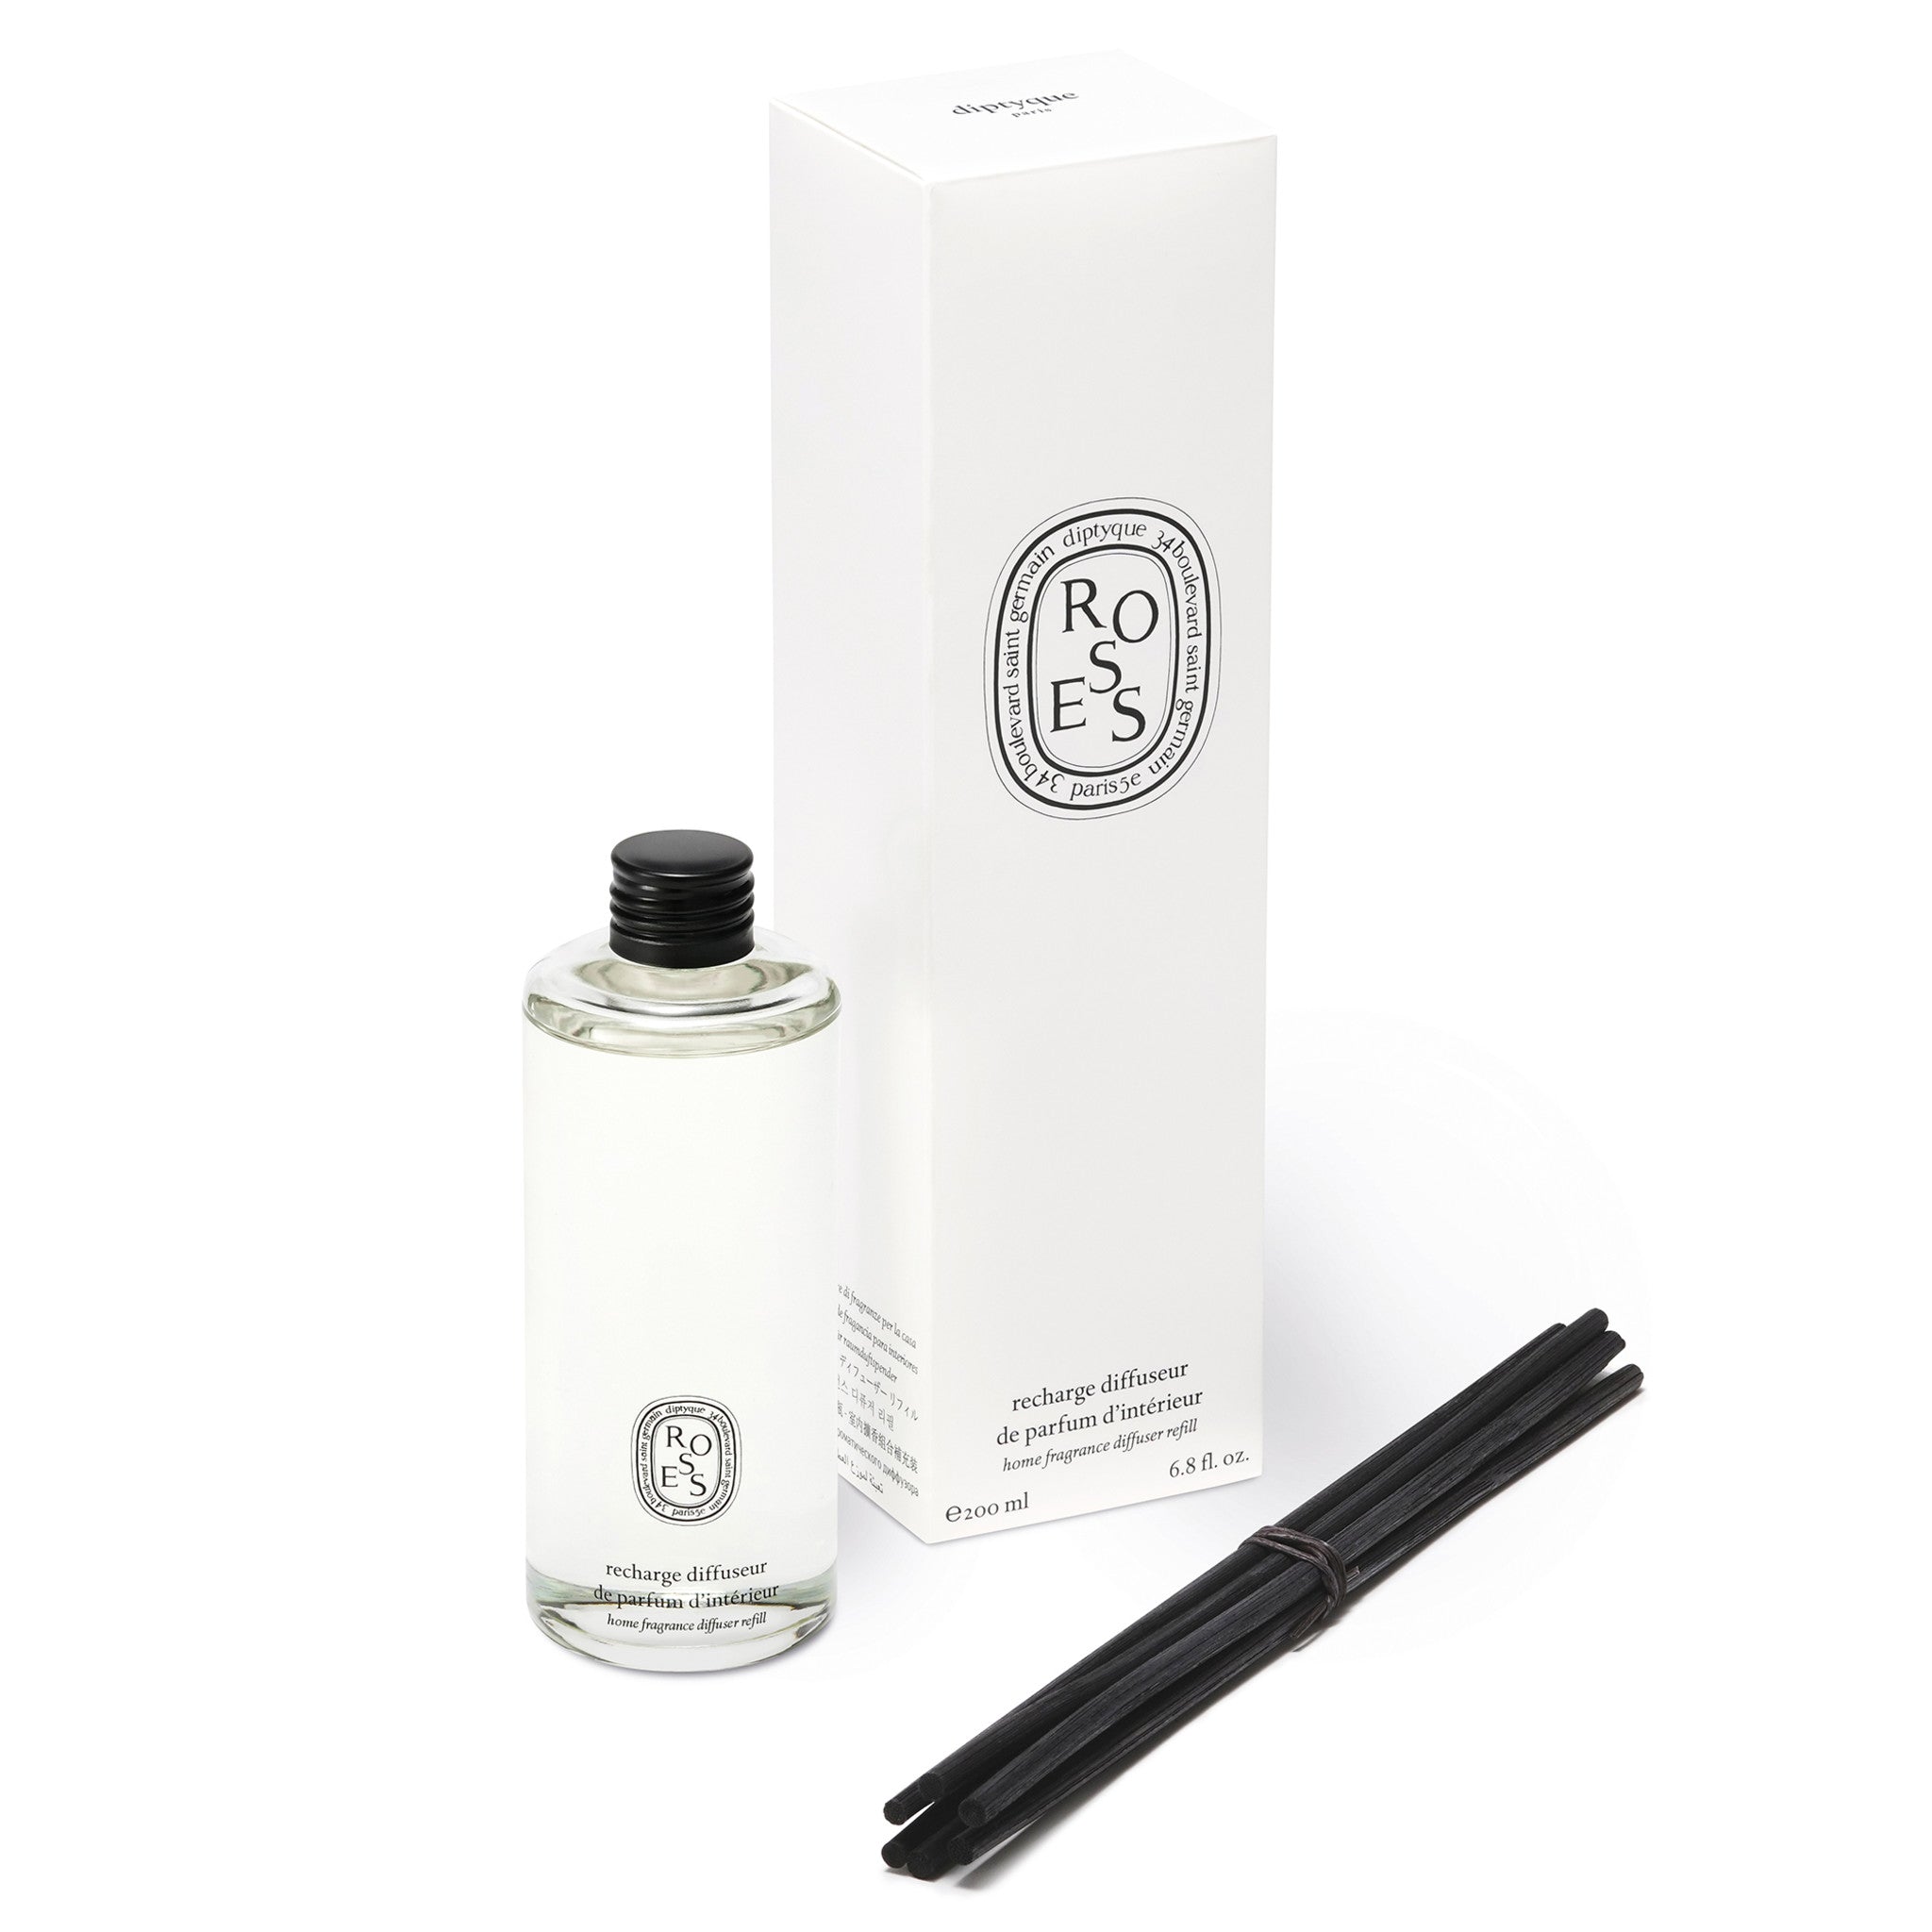 Diptyque Roses Home Fragrance Diffuser Refill main image.